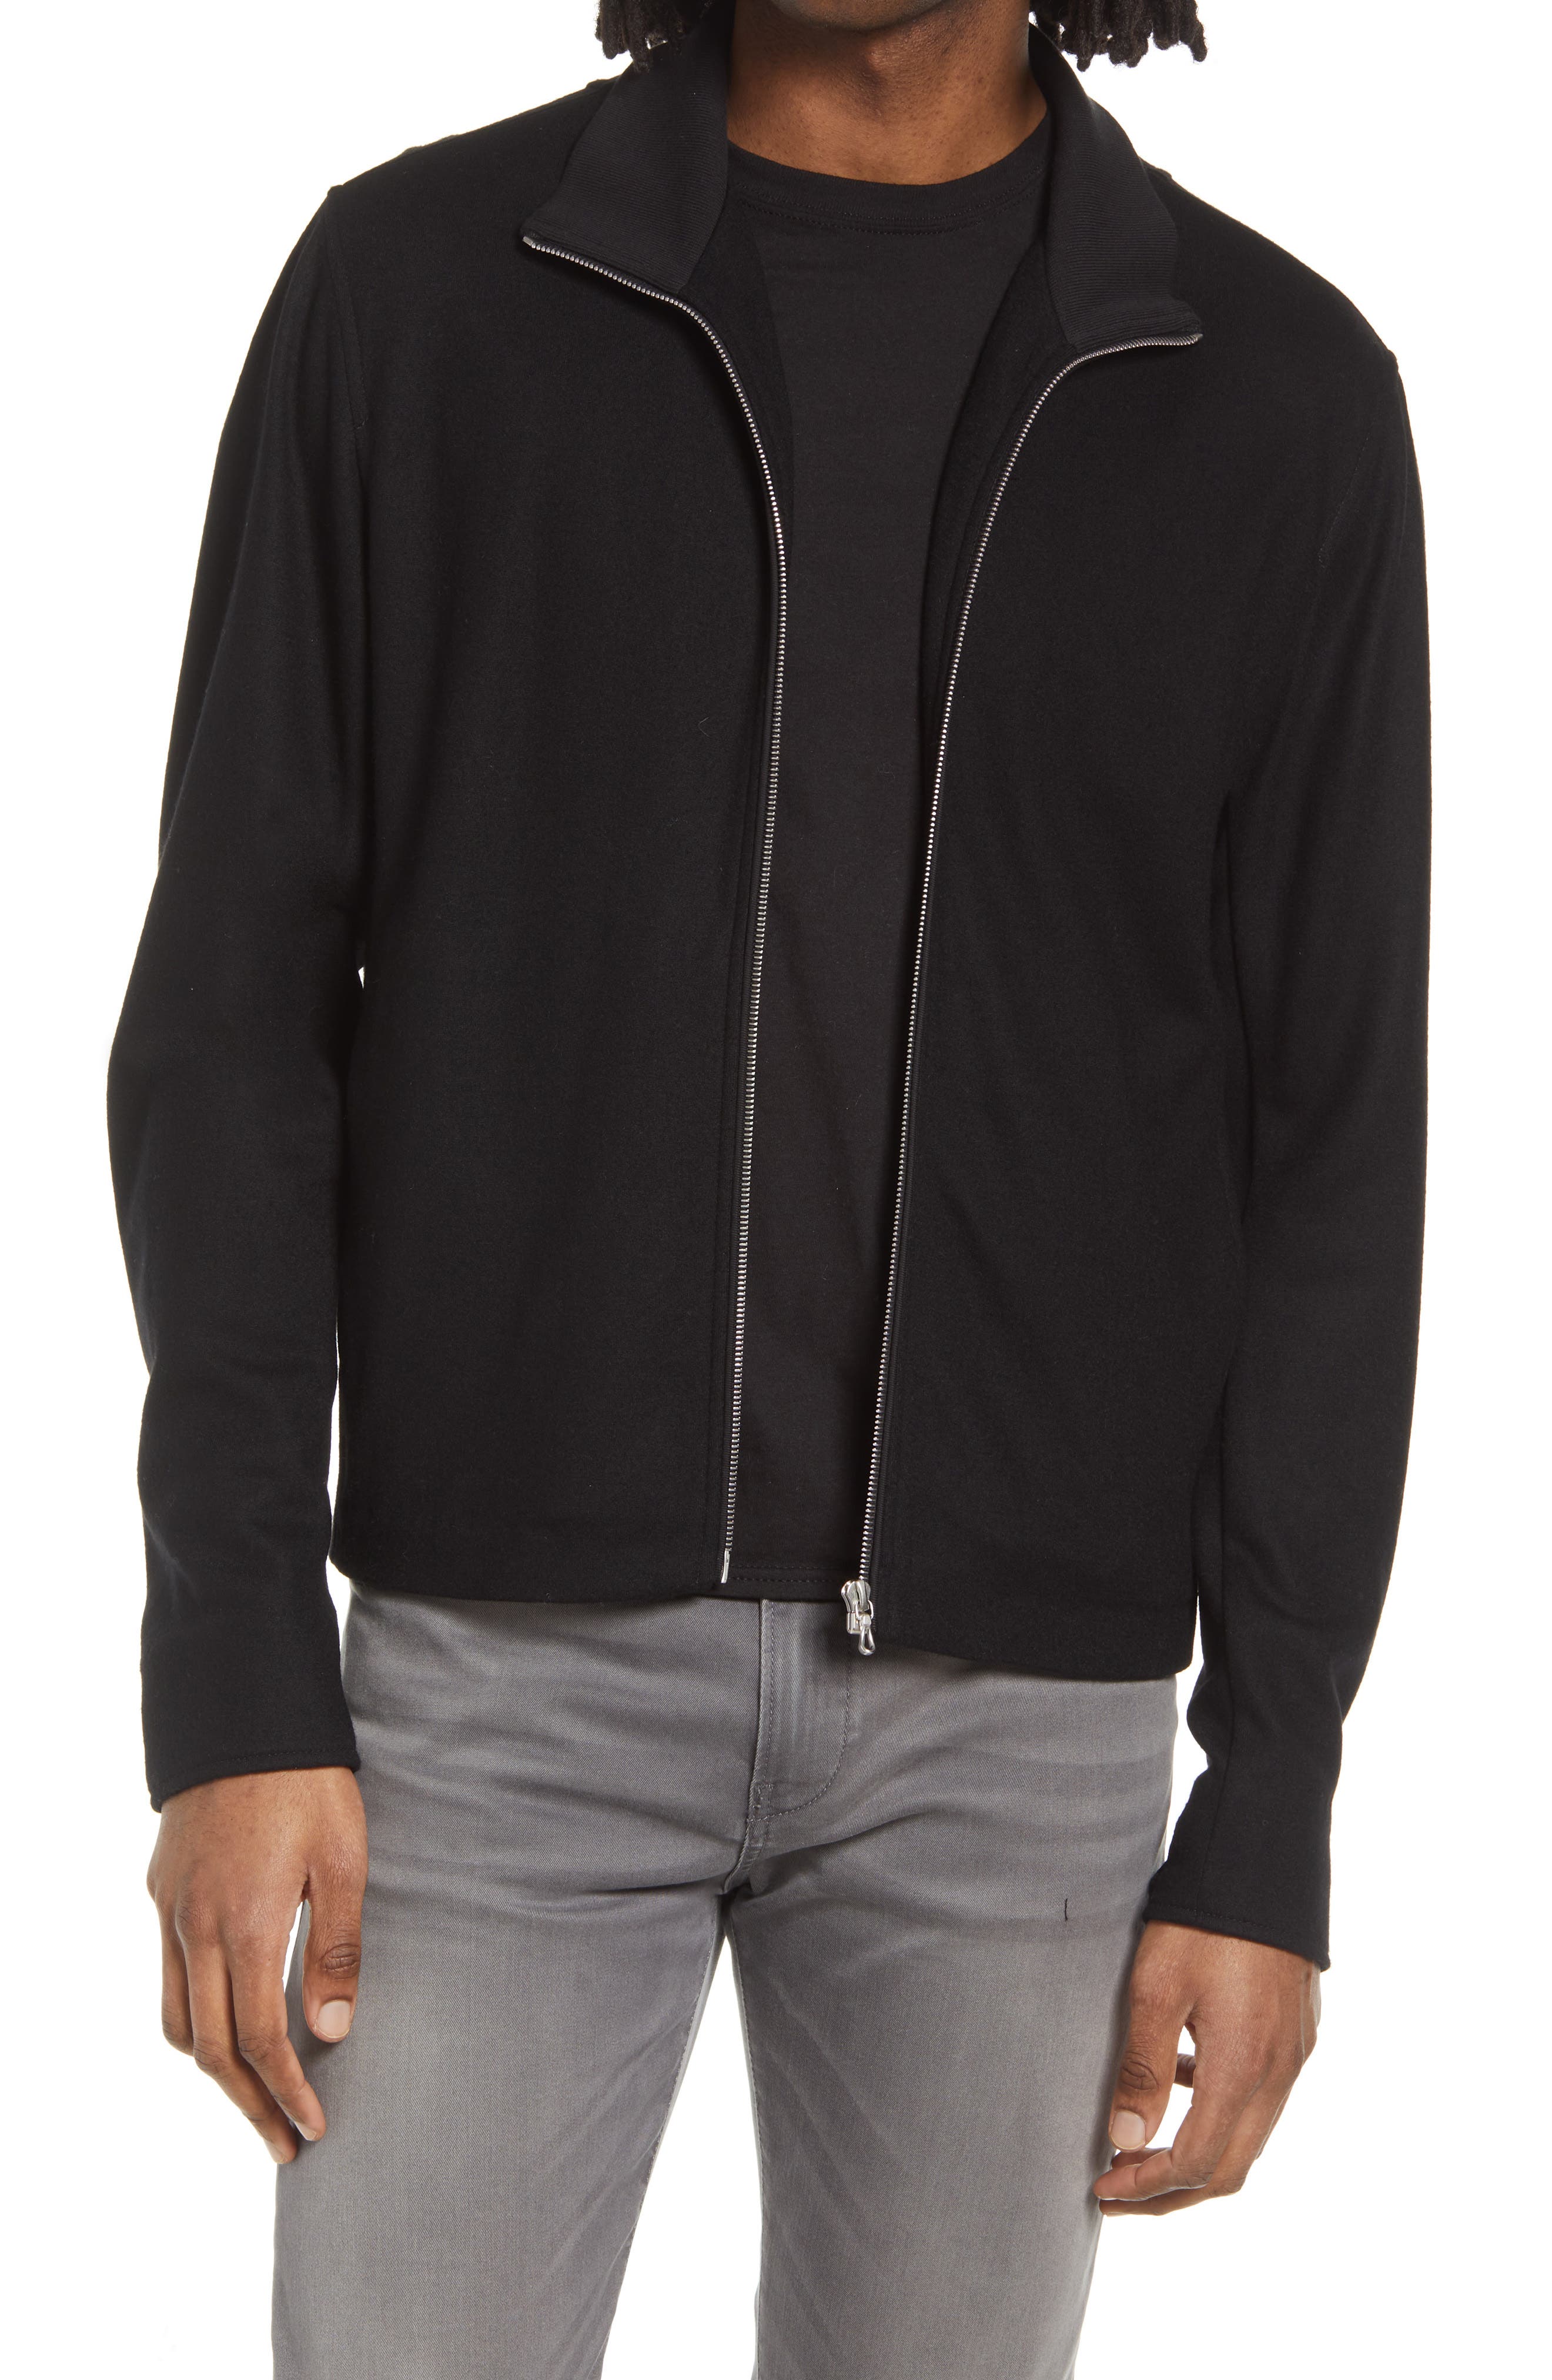 rag & bone Andrew Front Zip Wool Sweater in Black at Nordstrom, Size Large